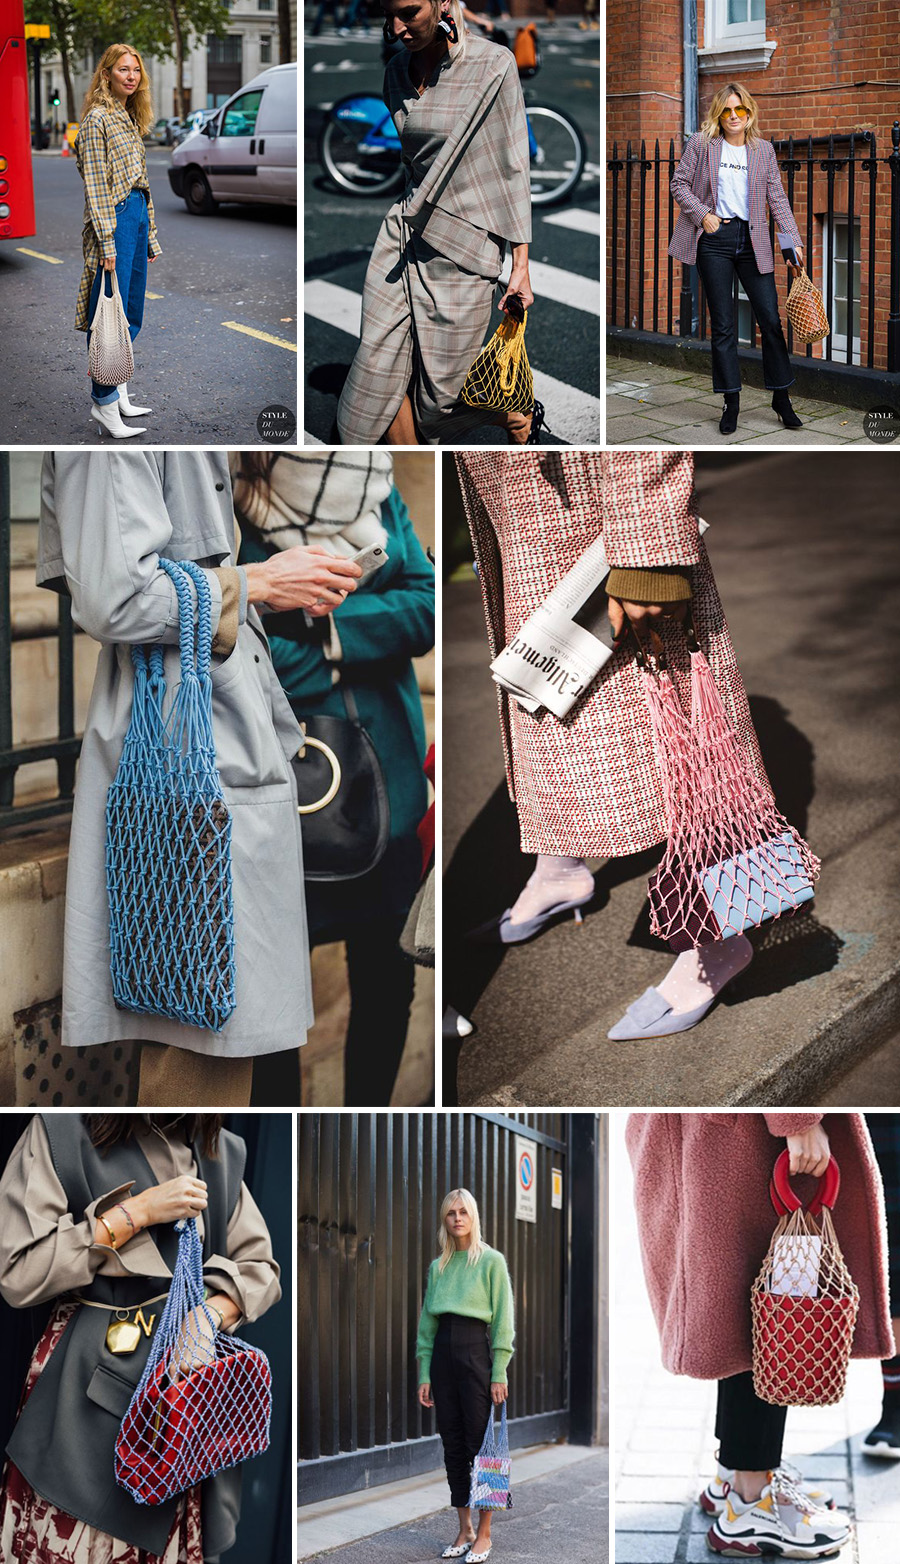 The accessory of the moment: Net Bags